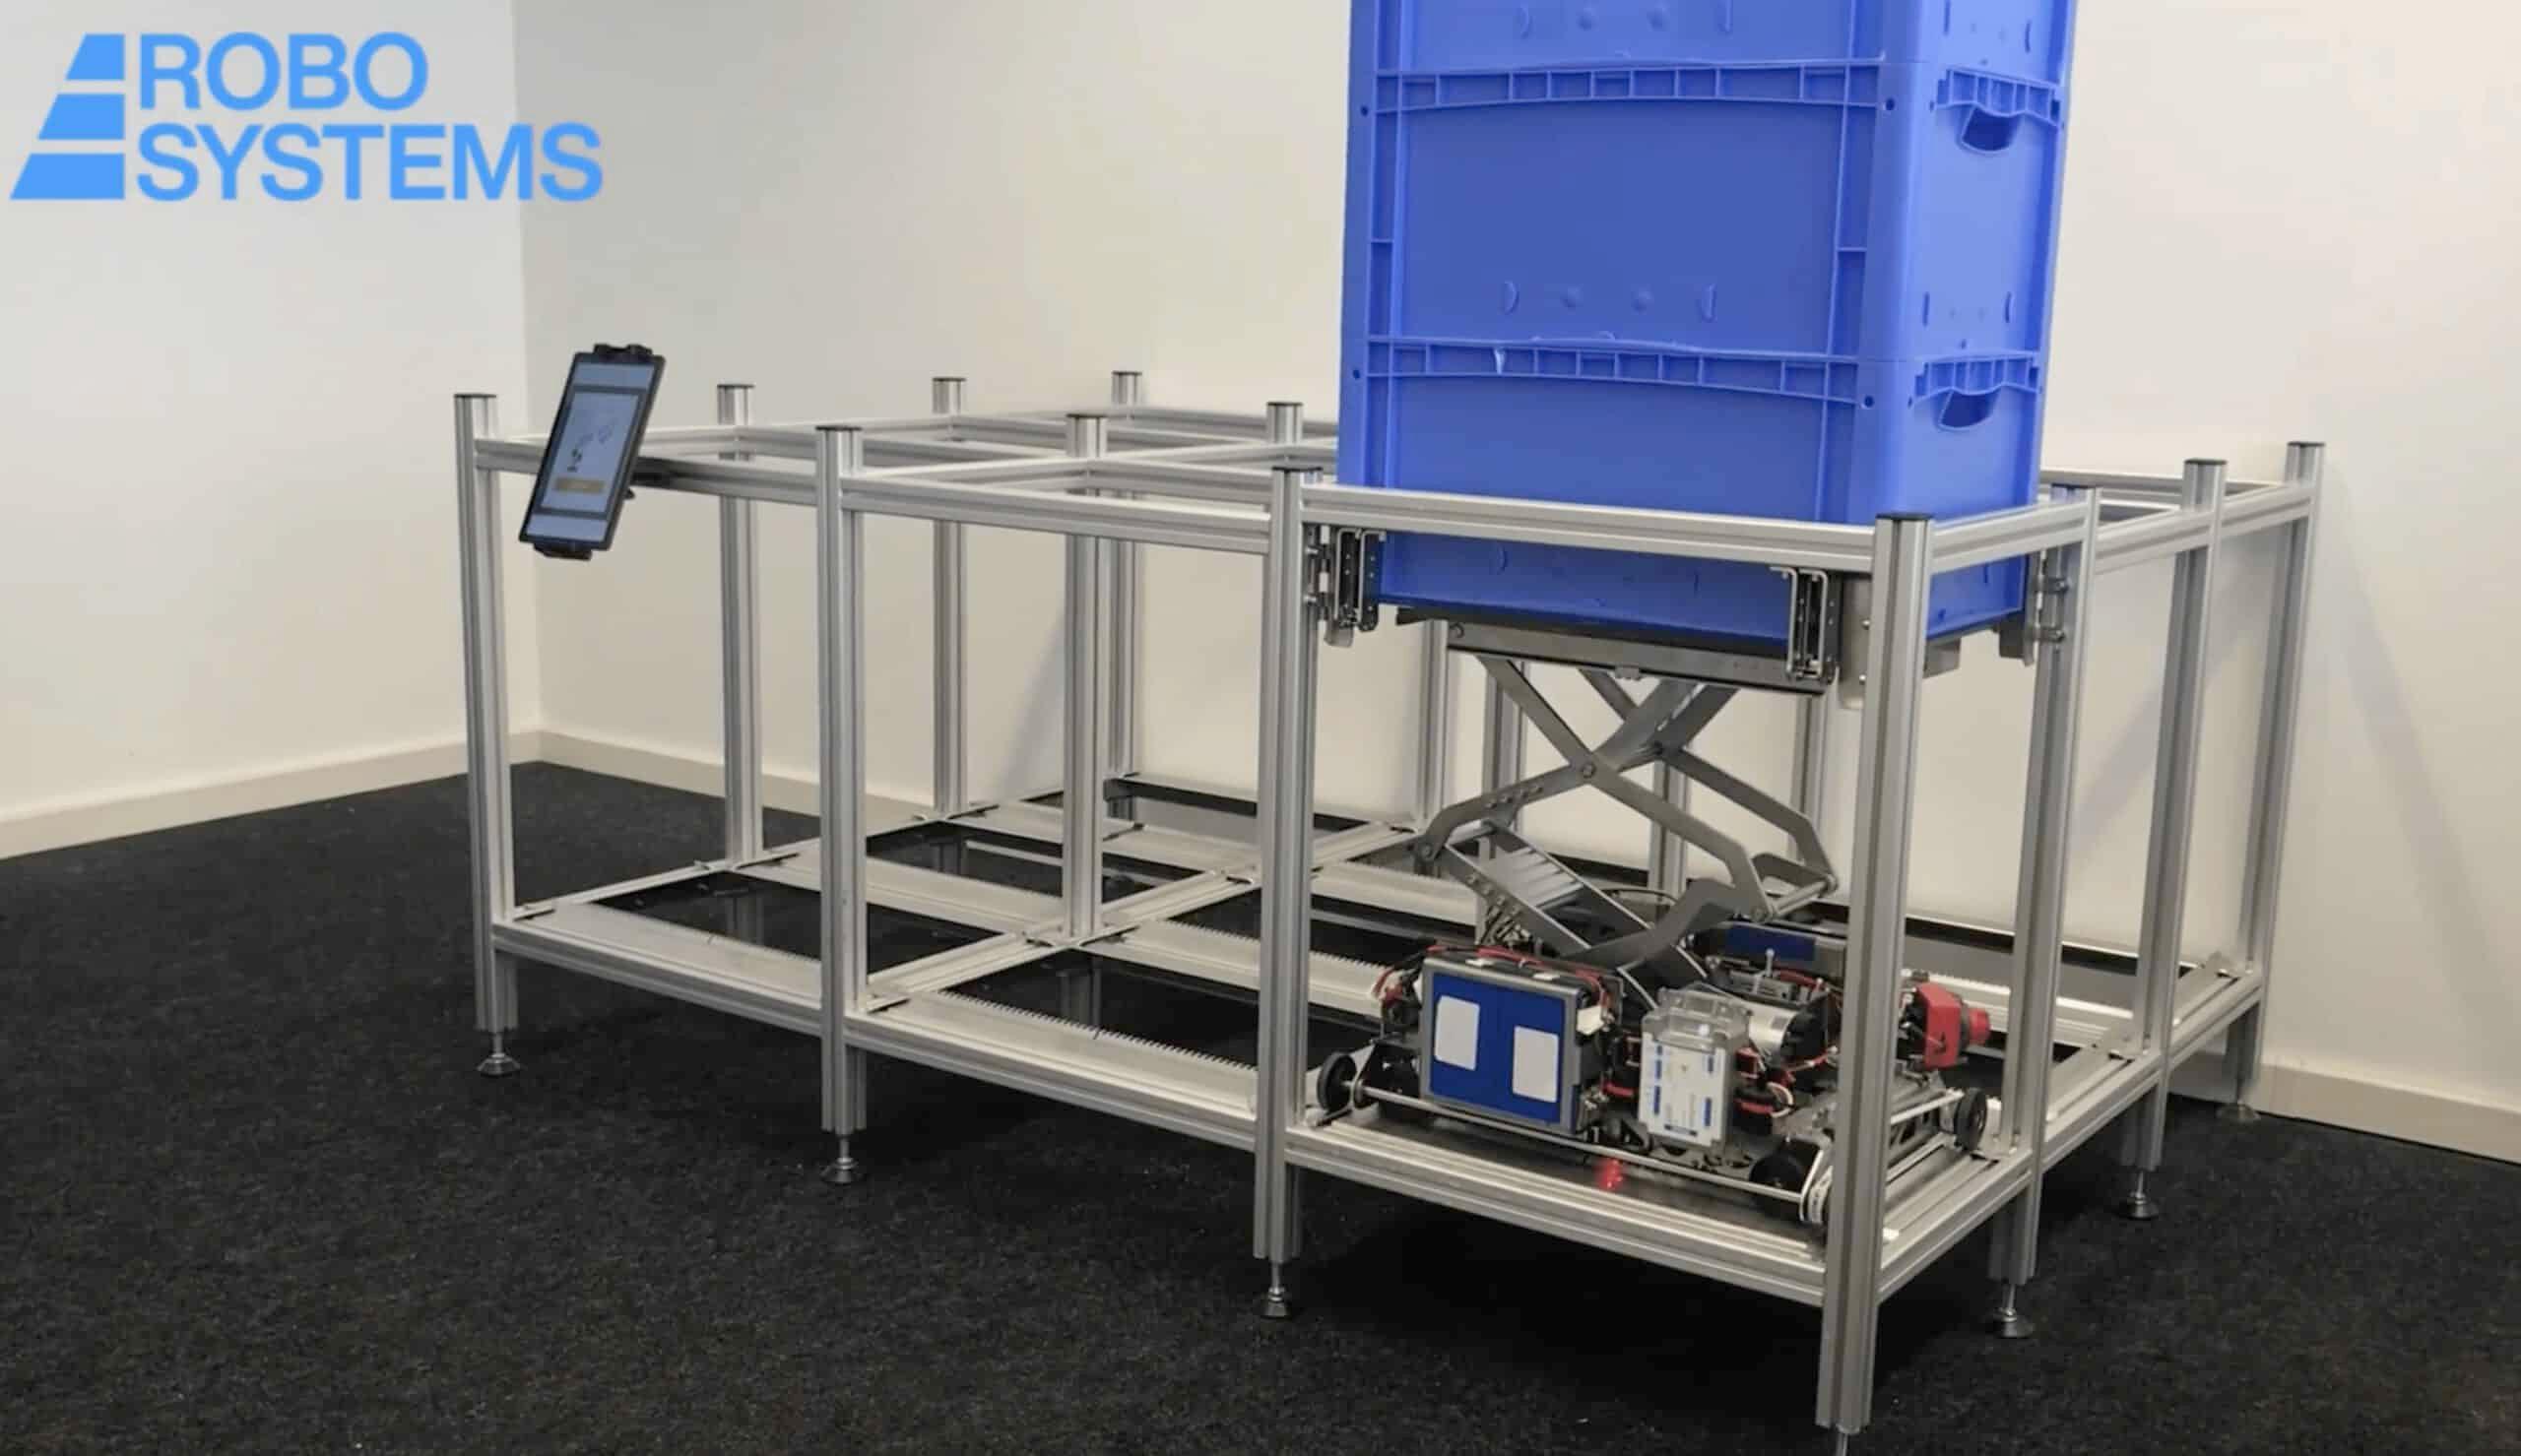 Product May 2022 - February 2023: Concept, development, and testing of a new "high-density storage solution for KLT boxes" - RoboSystems Consulting image